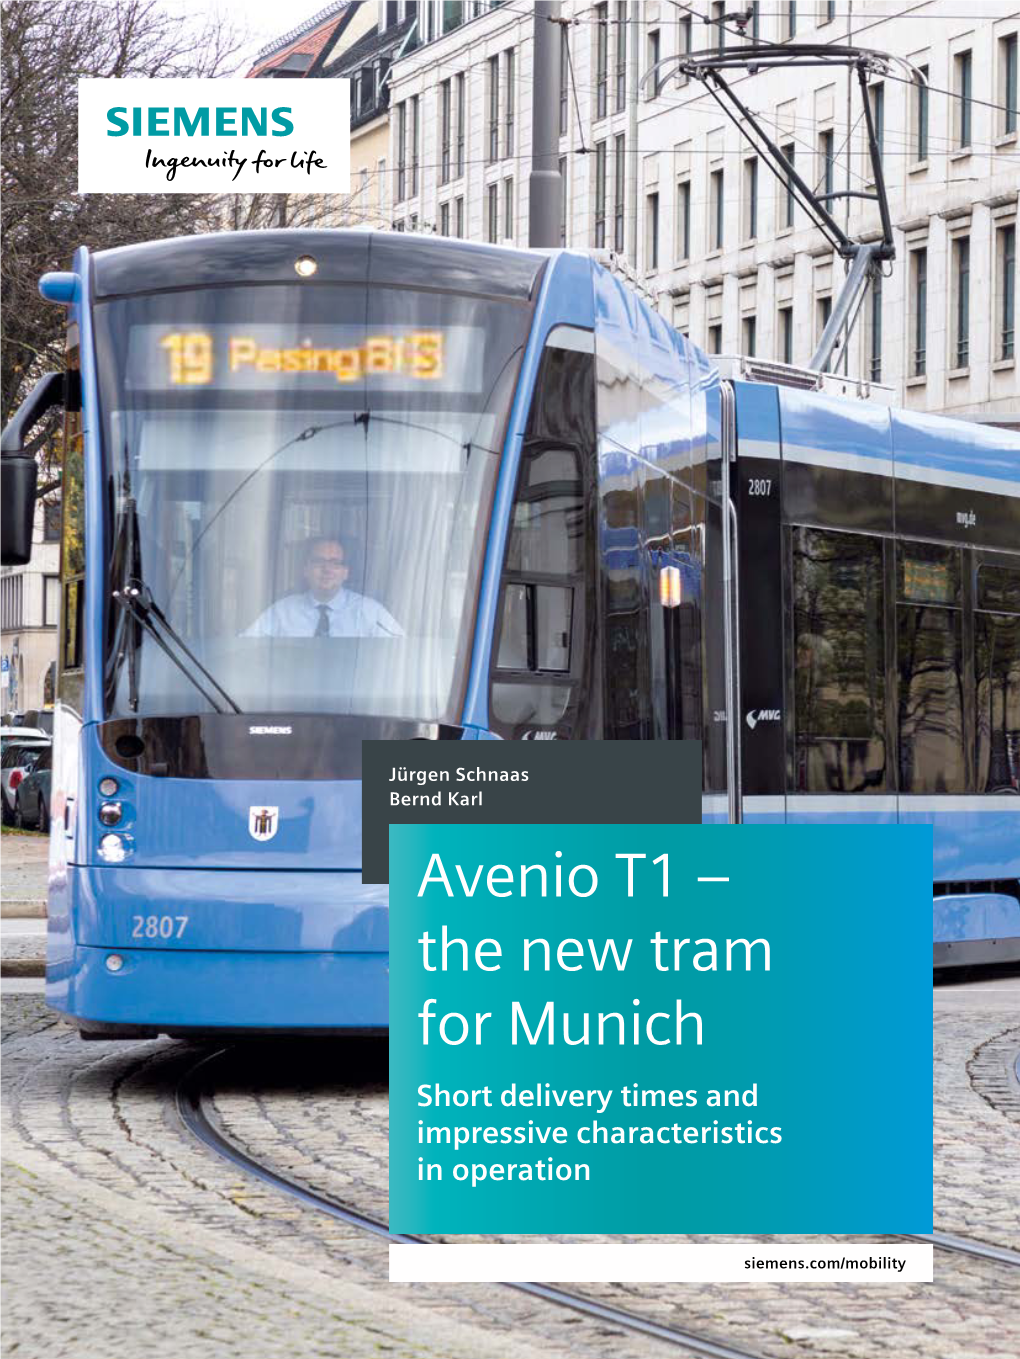 Avenio T1 – the New Tram for Munich Short Delivery Times and Impressive Characteristics in Operation